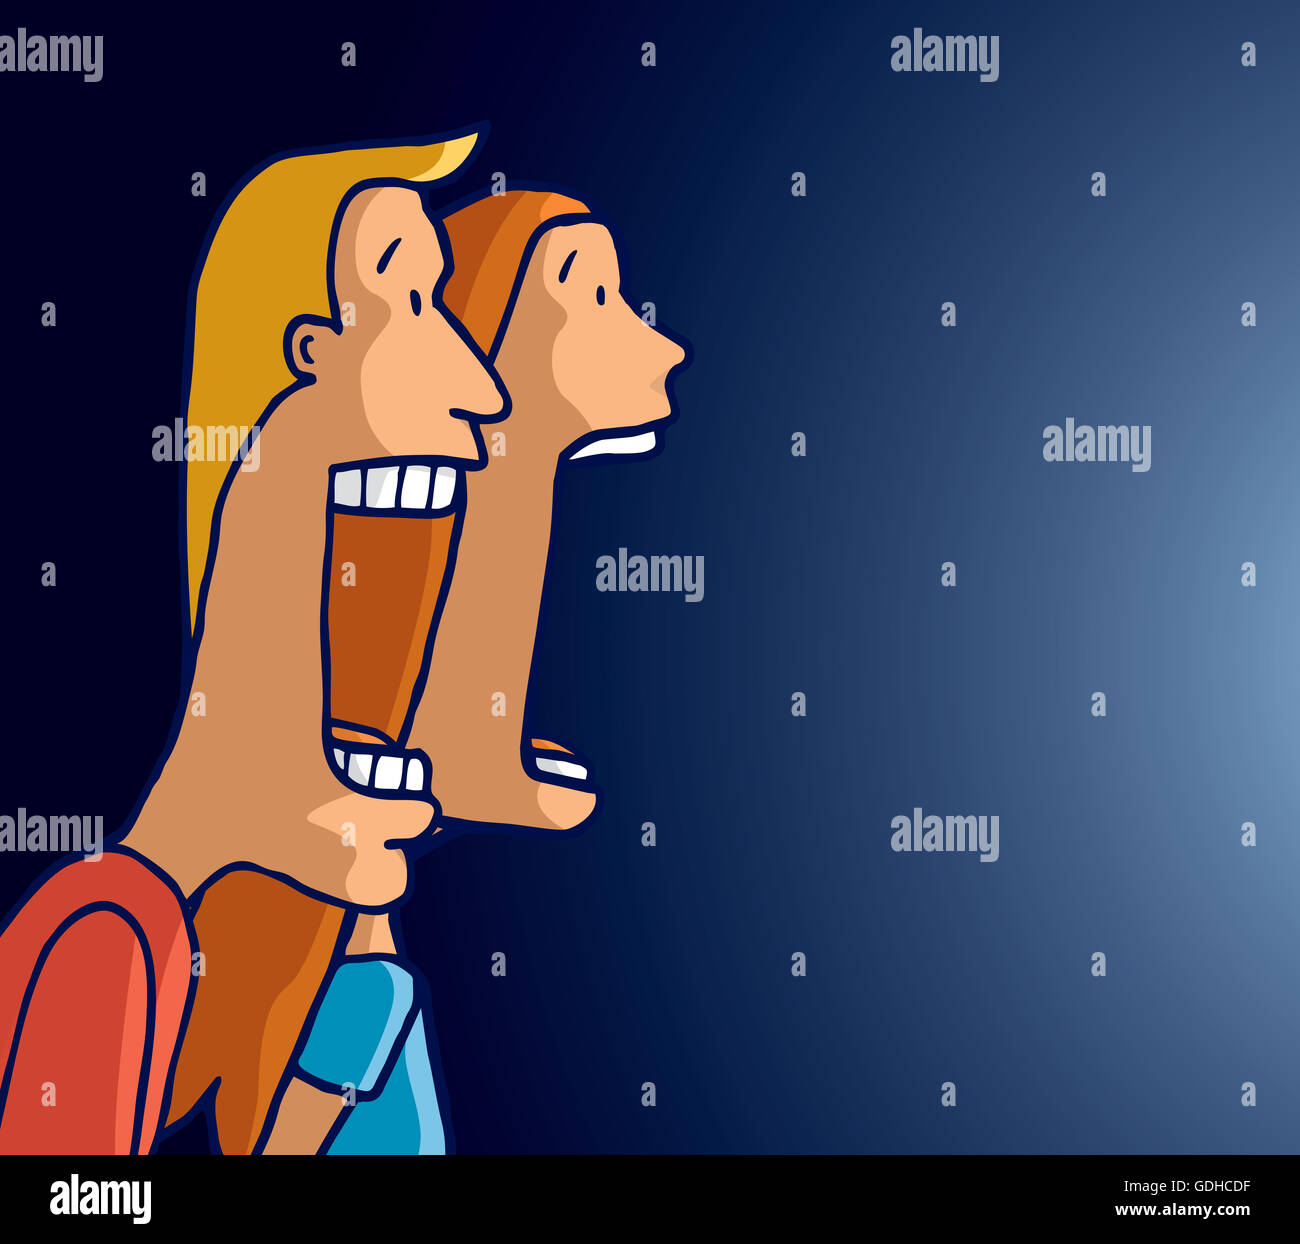 Cartoon illustration of scared couple screaming together facing a strong light Stock Photo